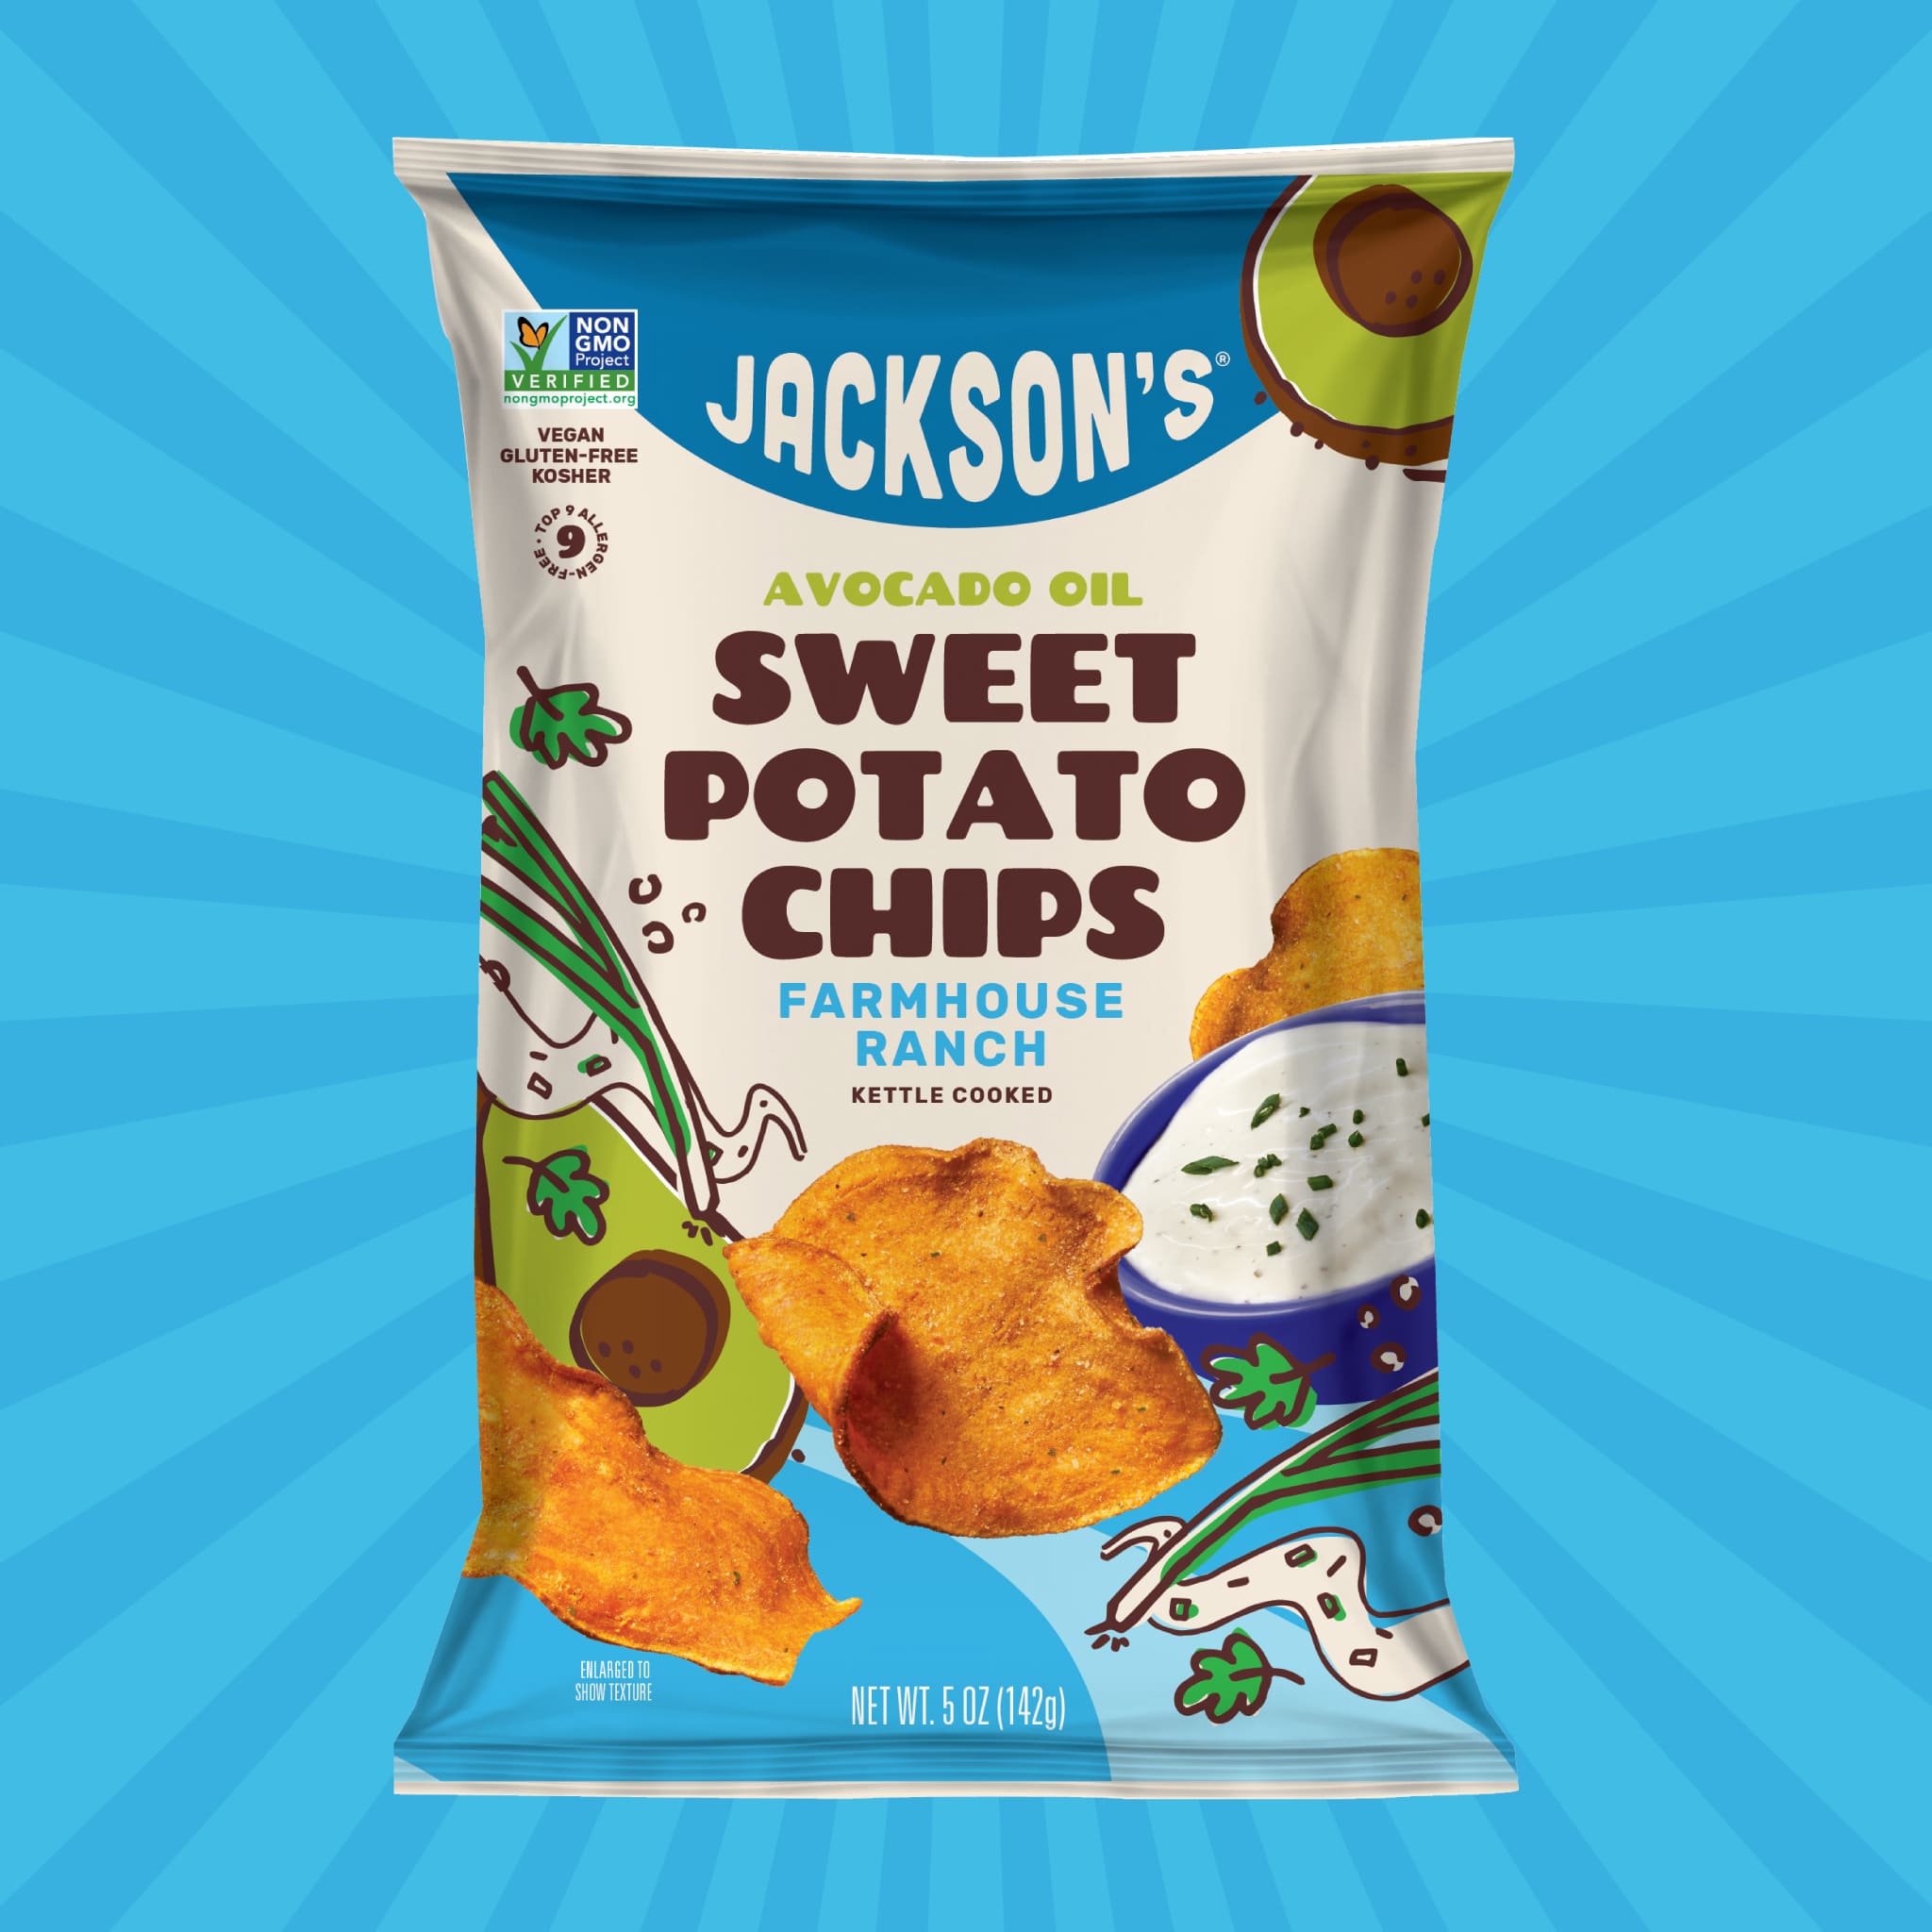 Jackson's Sea Salt Sweet Potato Chips with Avocado Oil - Buy or Subscribe